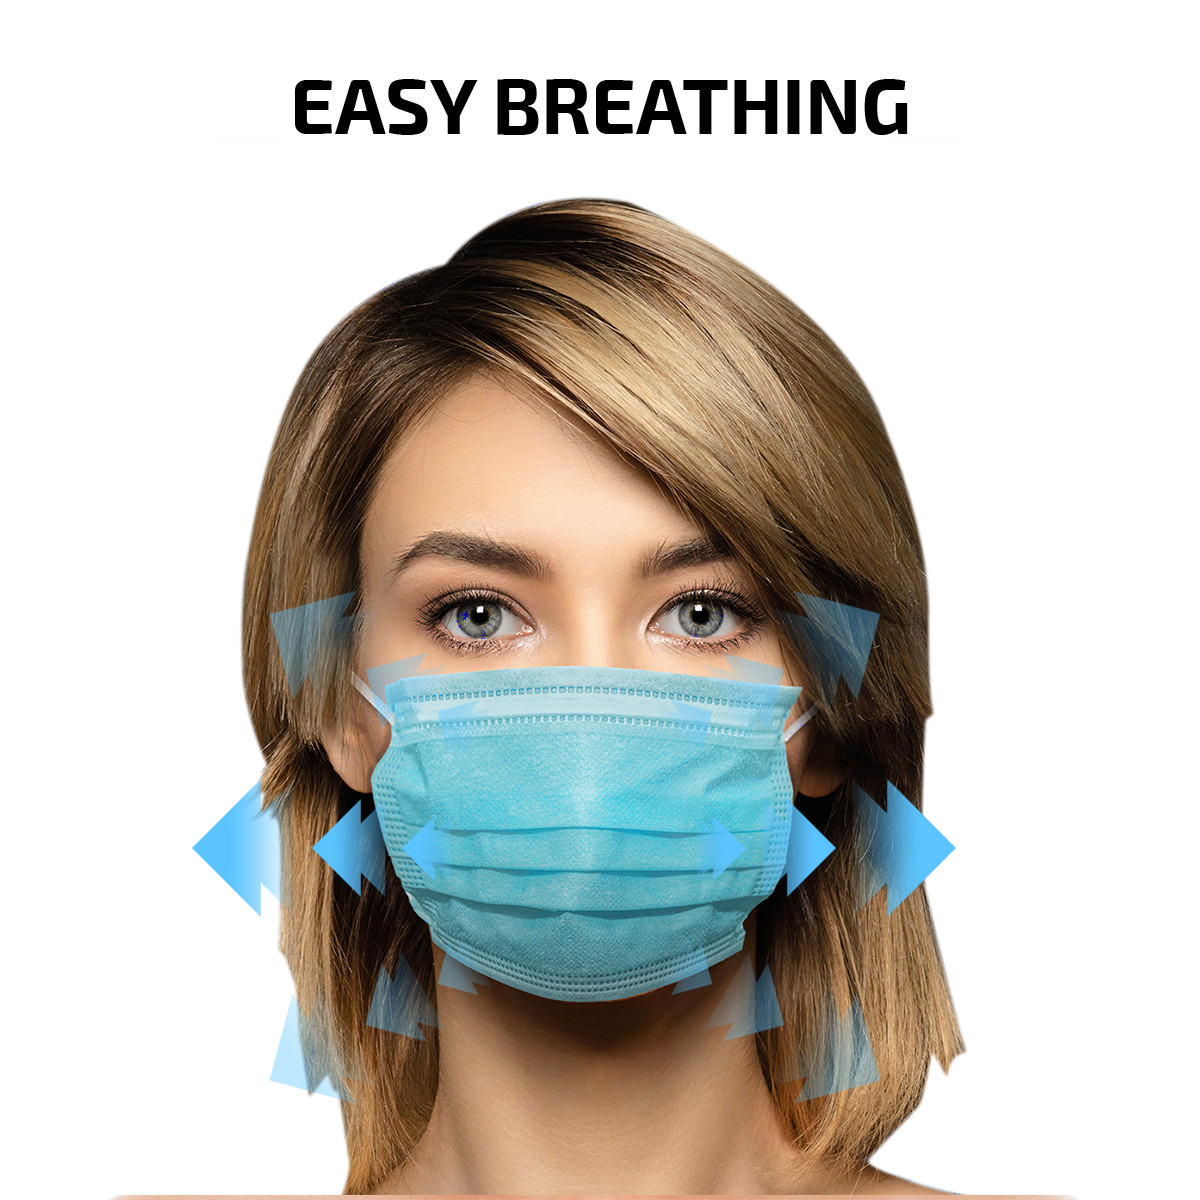 25 CT Disposable Ear loop Nose Clip Face Mask Blue 3 Ply Non-Woven Soft Fabric & Comfortable Outdoor Cover Guard Protection Breathable to Dust, Pollution, Fluids with Reusable Bag Package By Nifola - image 5 of 7